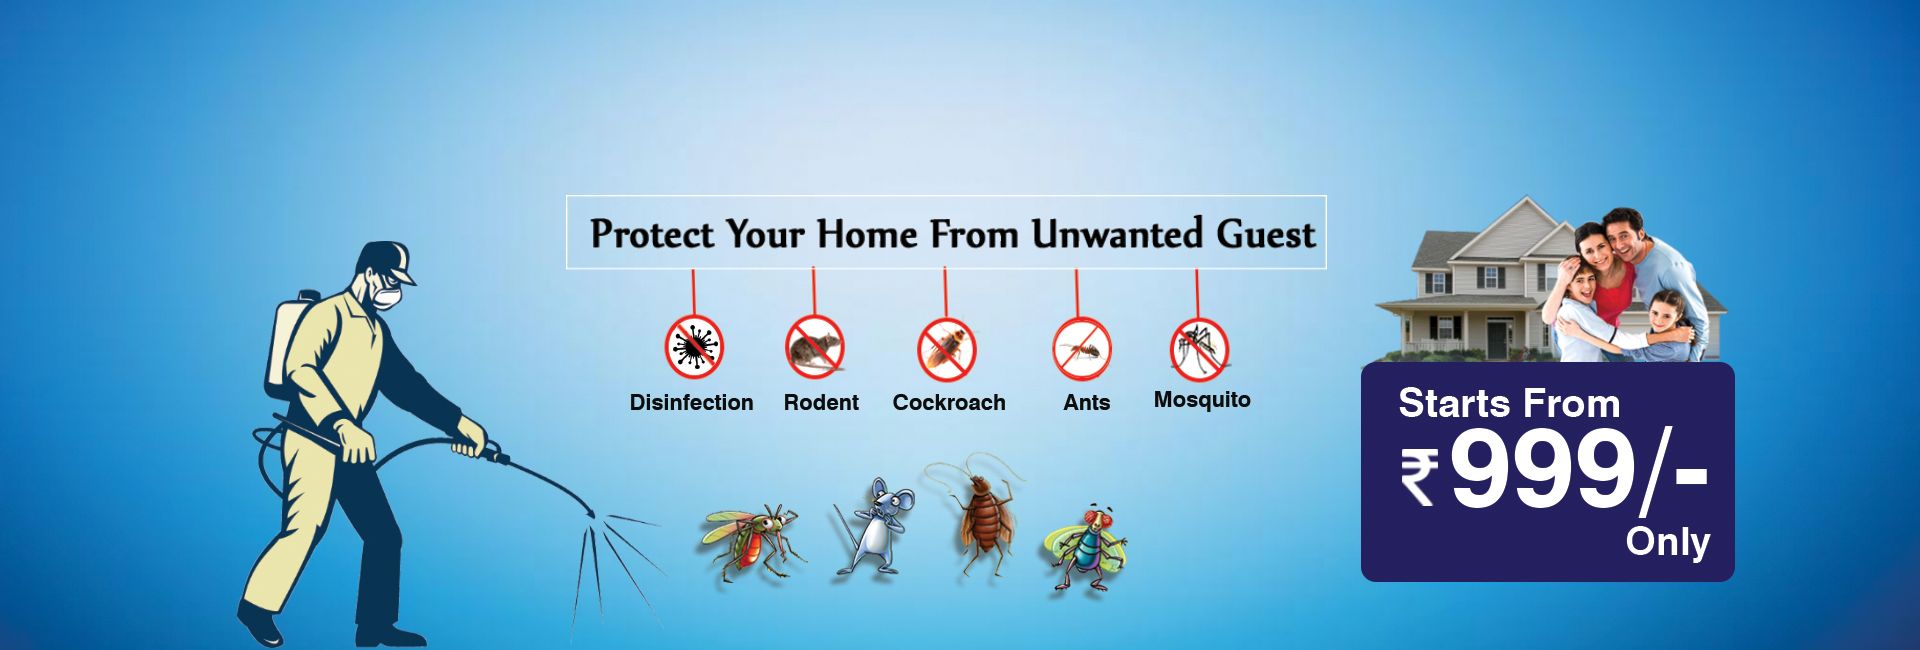 Pest Control Service for mosquito service in Ahmedabad